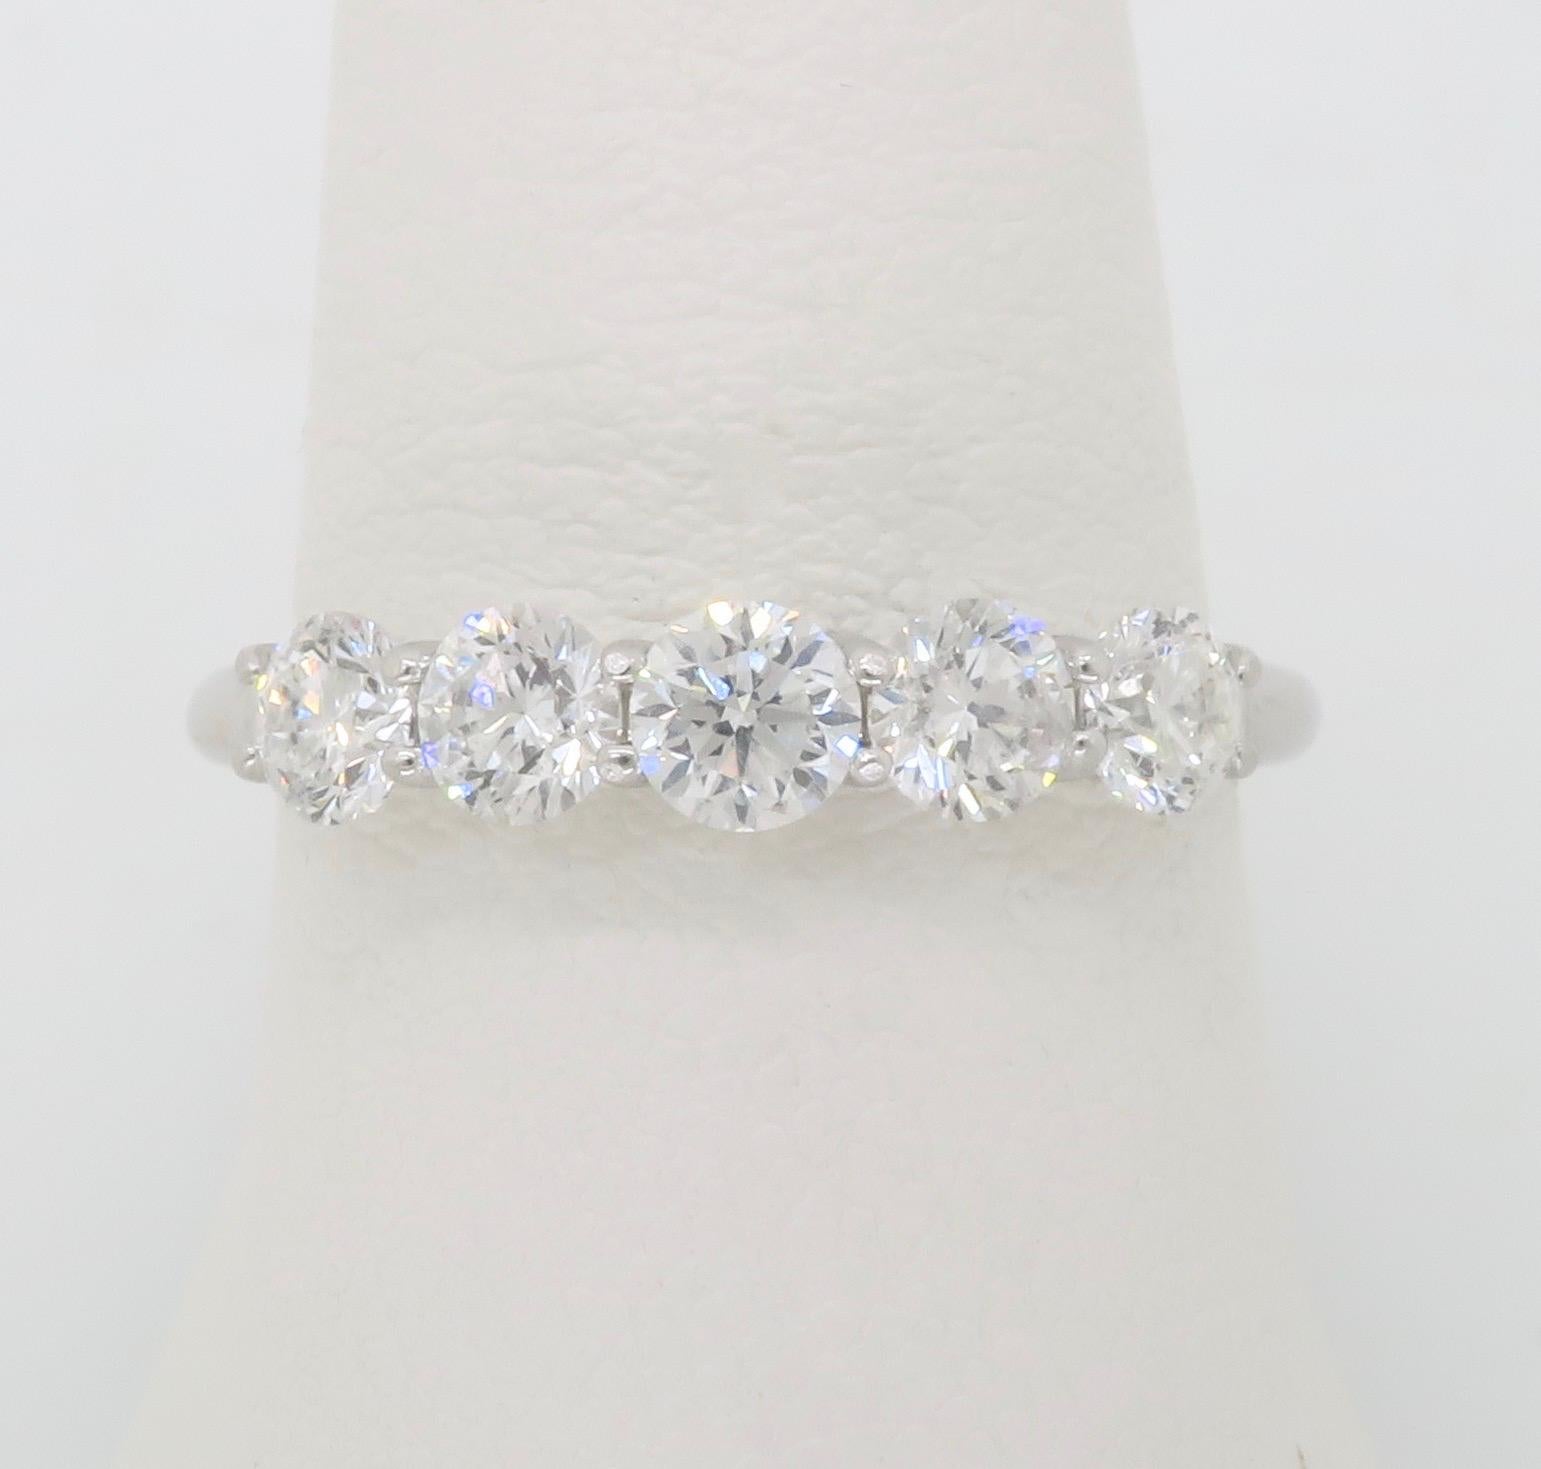 Five Stone Diamond ring featuring .85CTW of diamonds made in White Gold.

Diamond Carat Weight: Approximately .85CT
Diamond Cut: Round Brilliant 
Diamond Color: G-H
Diamond Clarity: SI1-SI2
Metal: 14k White gold
Ring Size: 6.75
Marked/Tested: